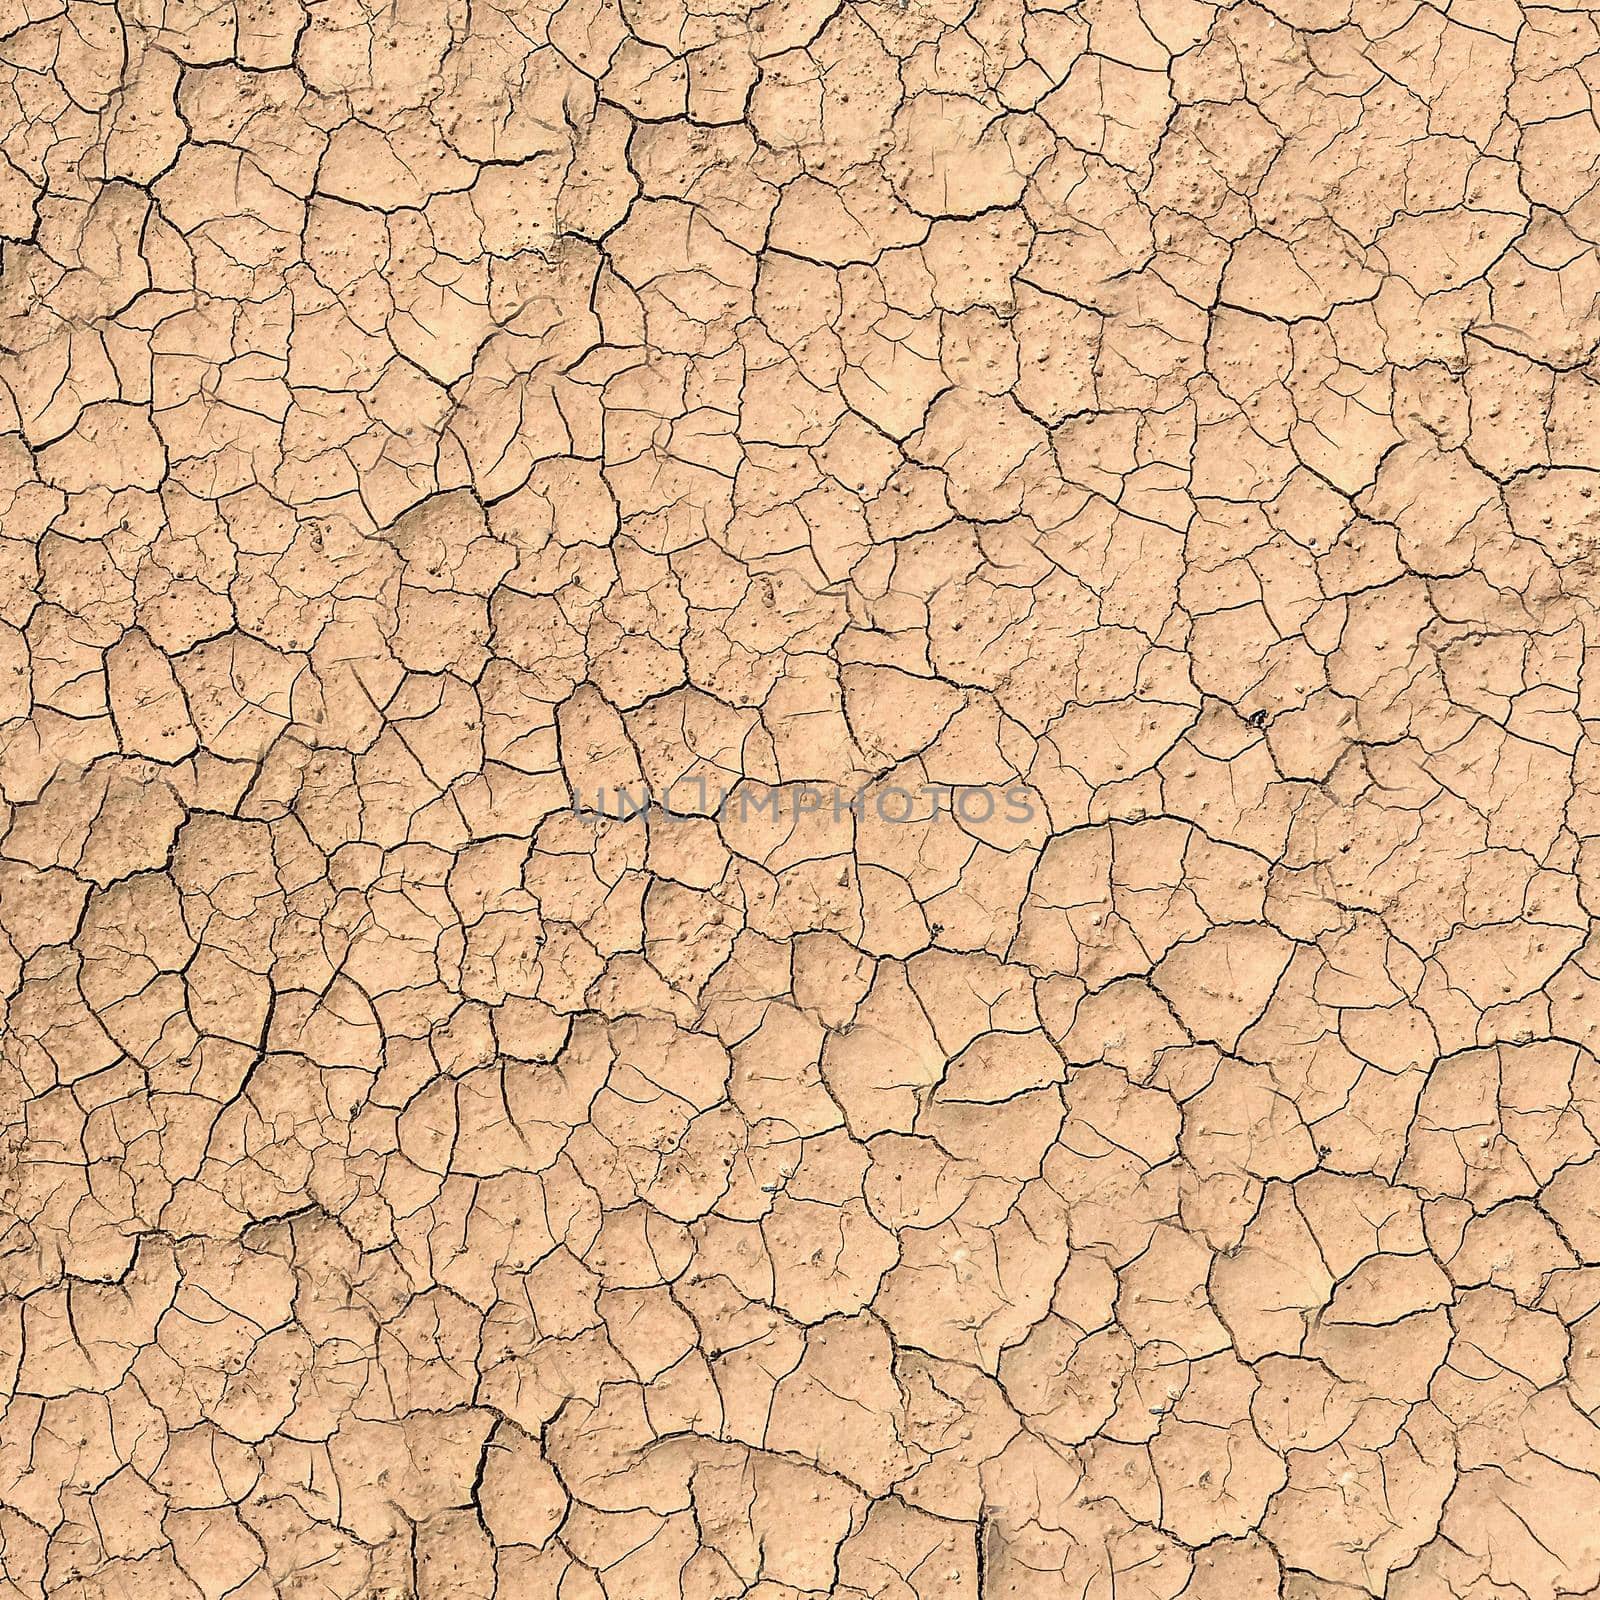 Dry earth with cracks on the surface by Mastak80